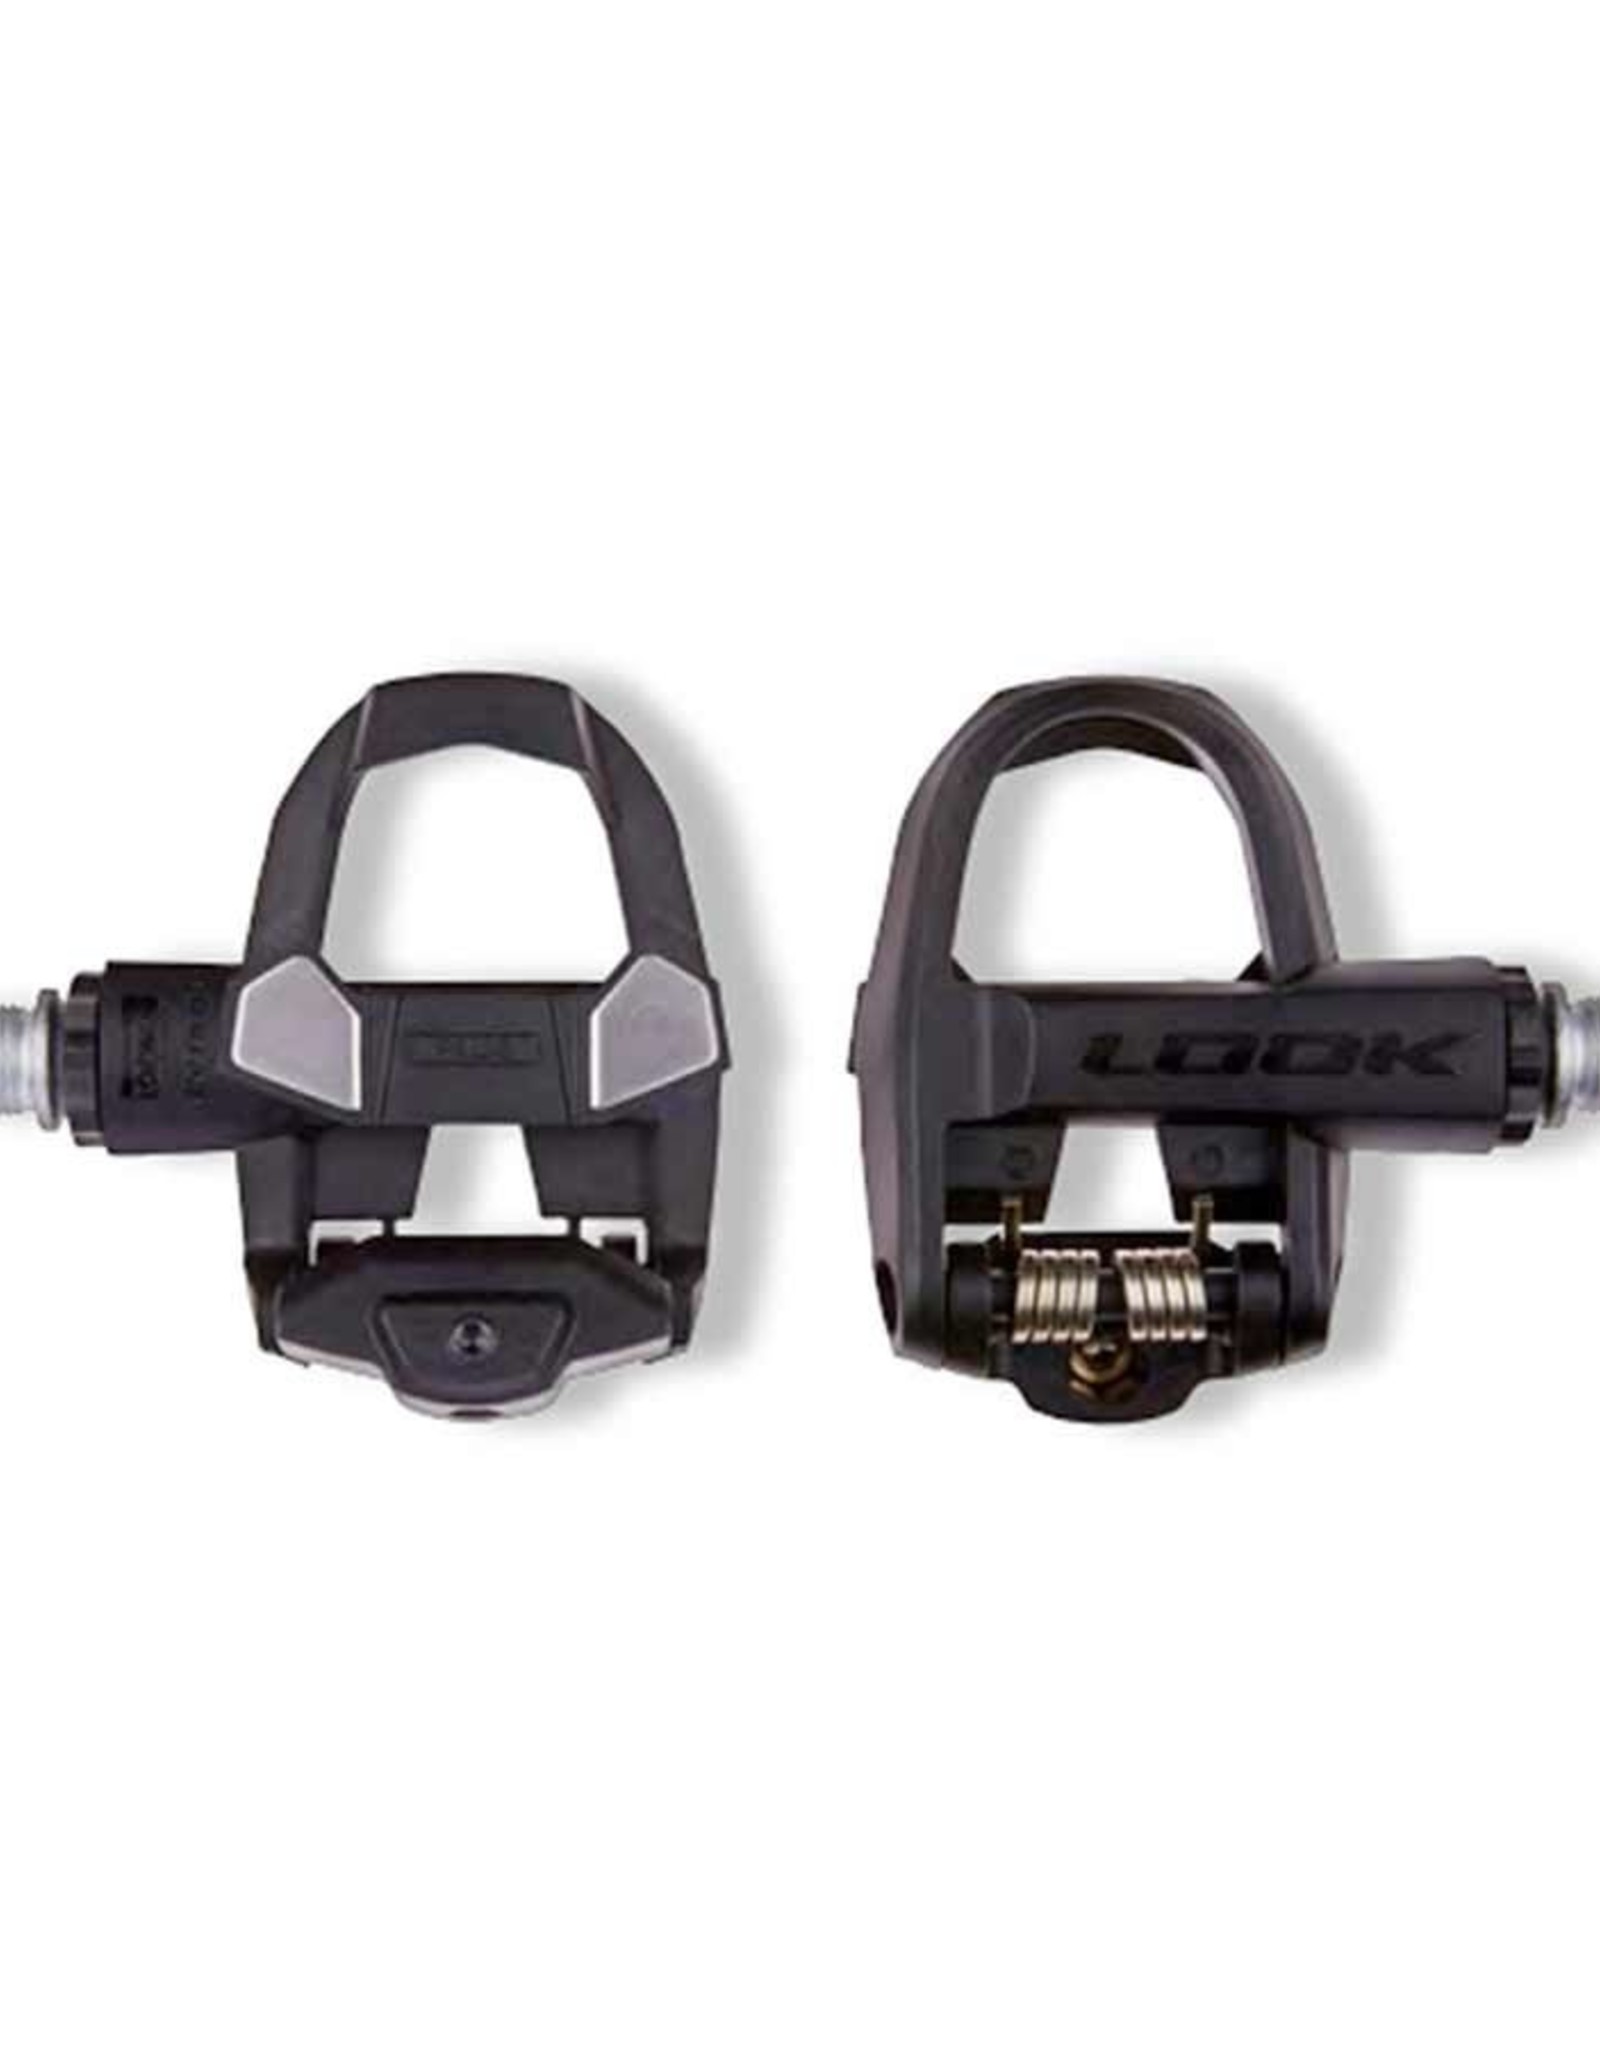 LOOK Look, KEO CLASSiC 3+, Pedals, Body: Composite, Spindle: Cr-Mo, 9/16'', Black, Pair